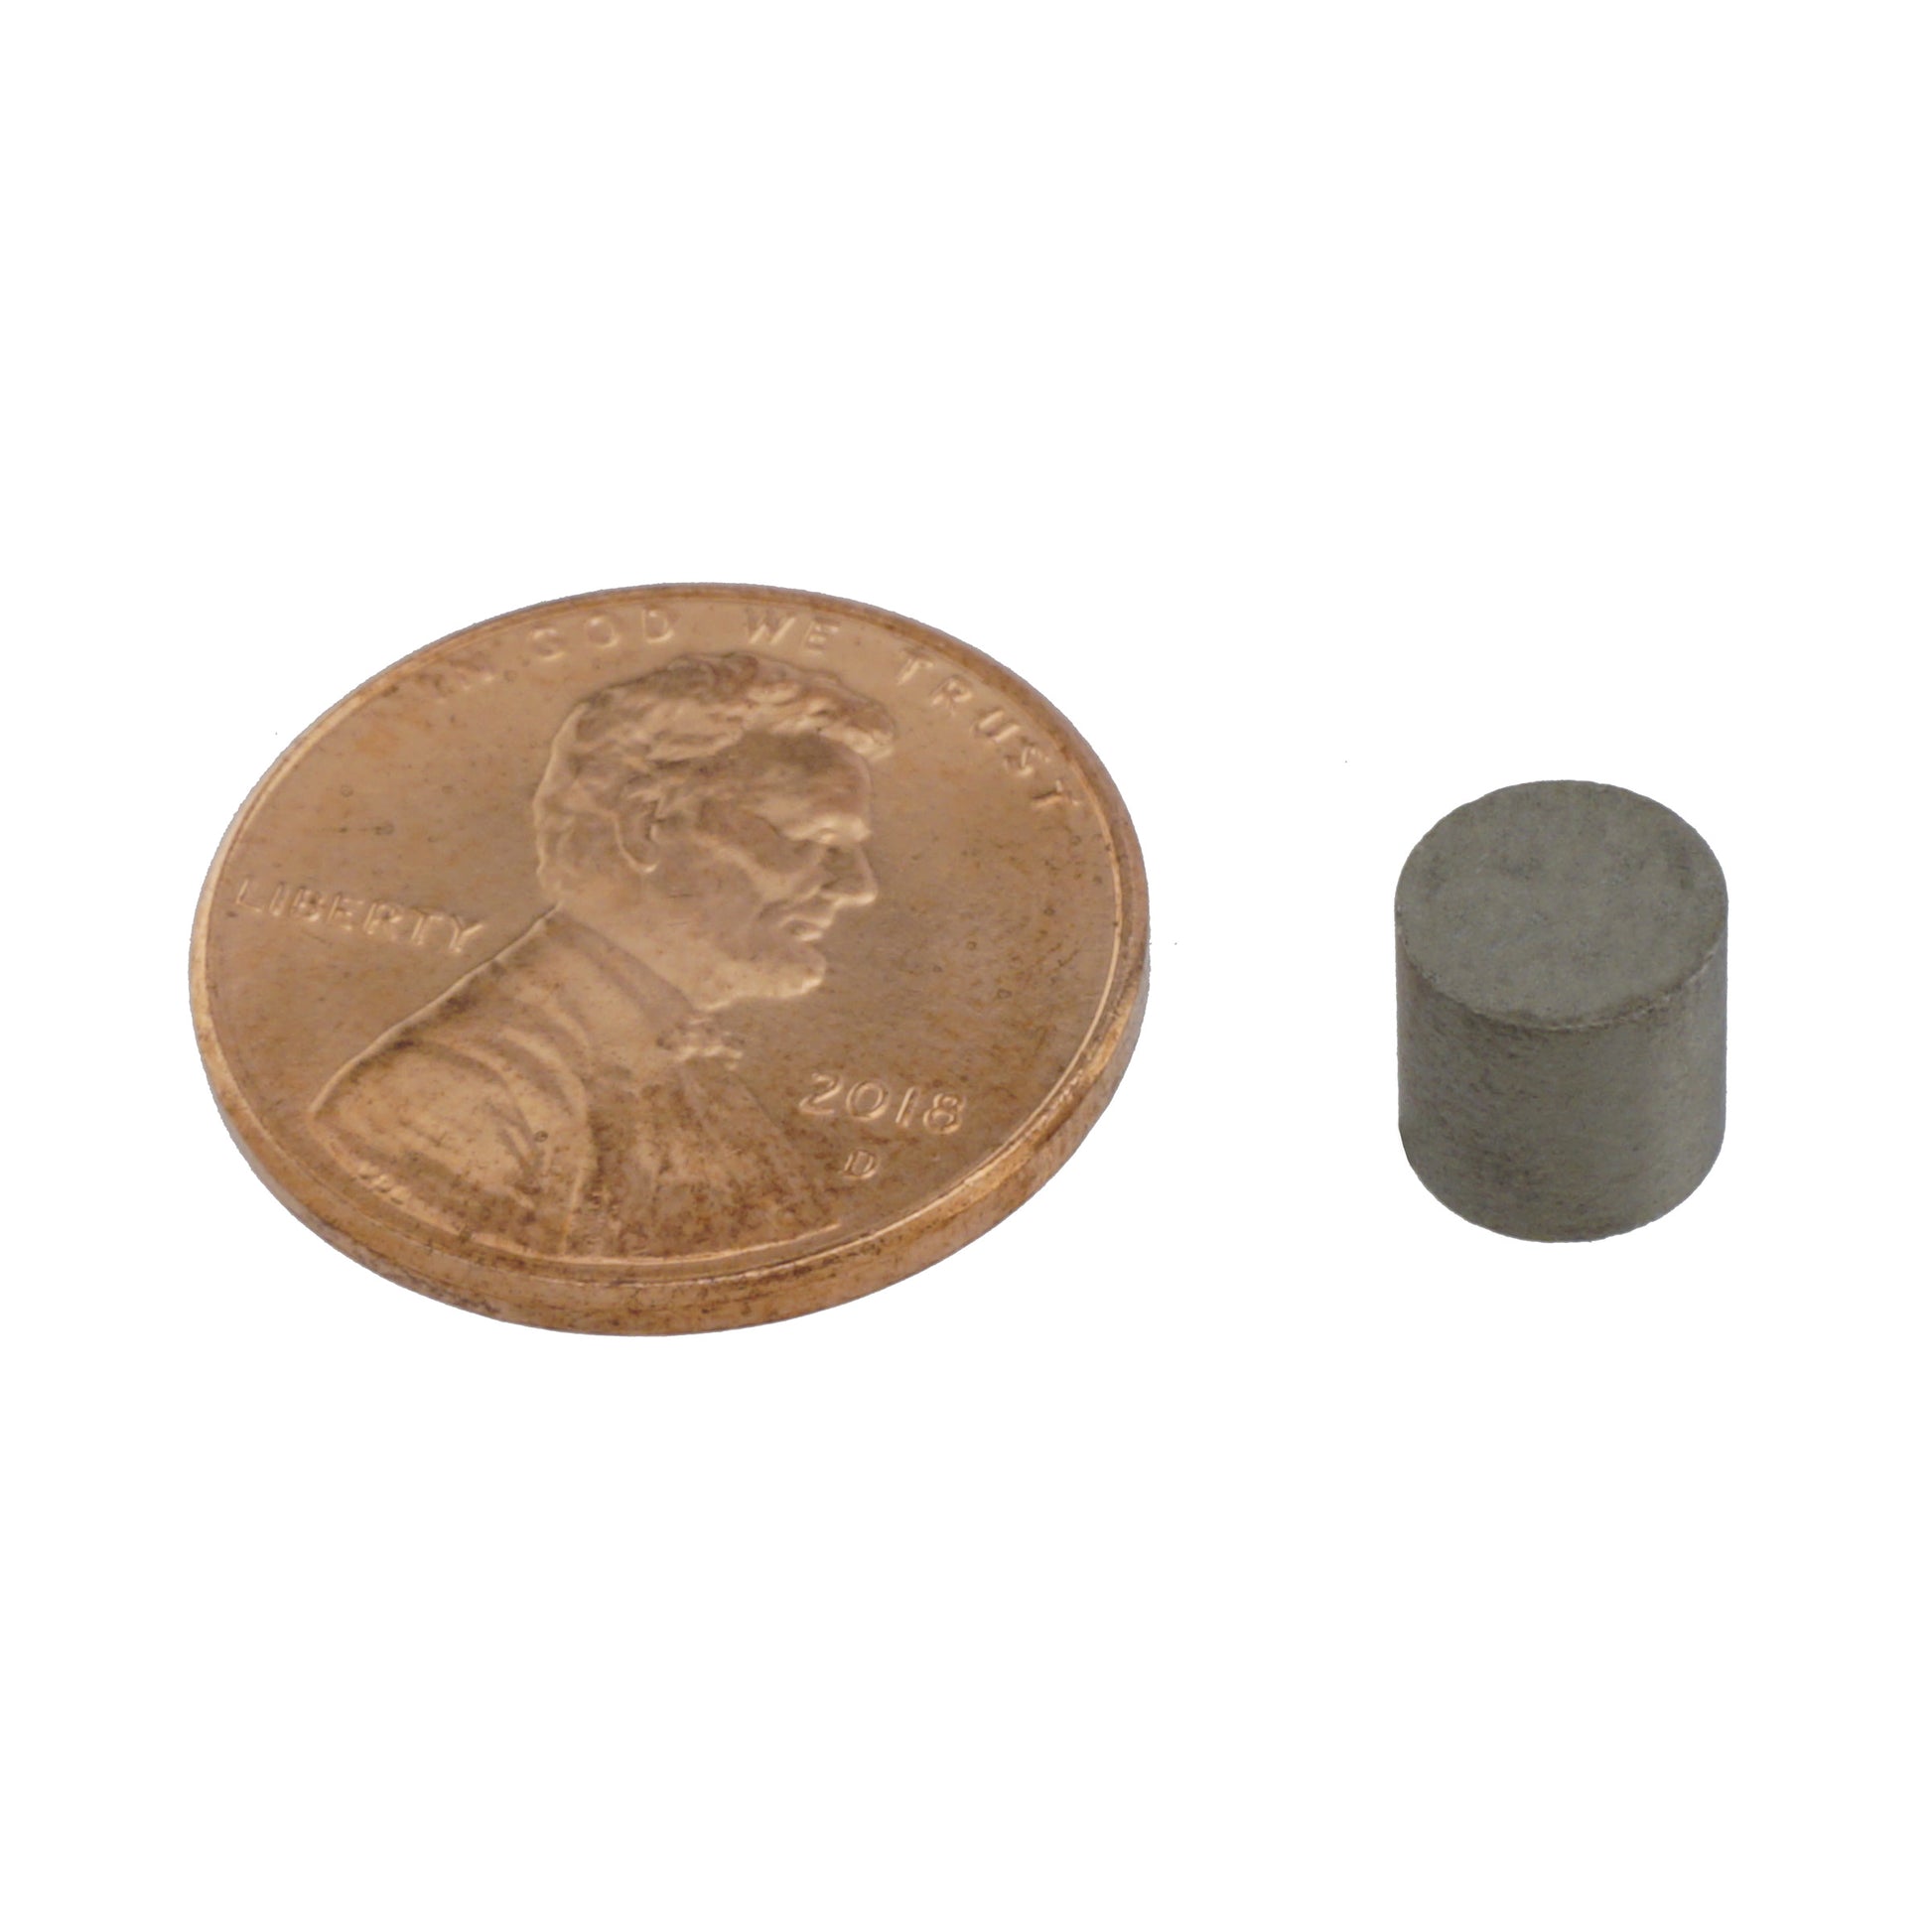 Load image into Gallery viewer, SCD2525 Samarium Cobalt Disc Magnet - Compared to Penny for Size Reference